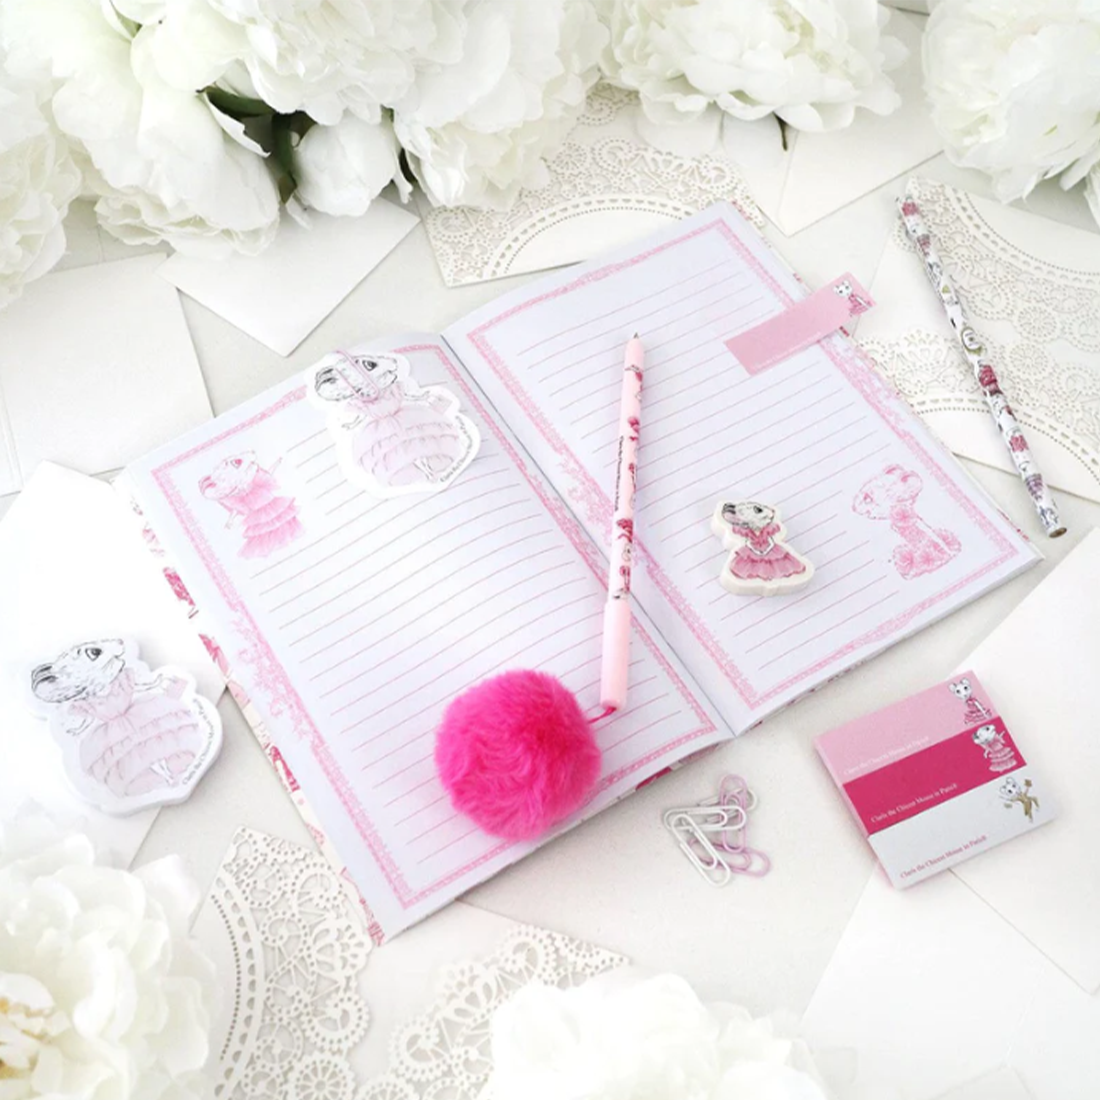 Claris The Mouse Stationery Set